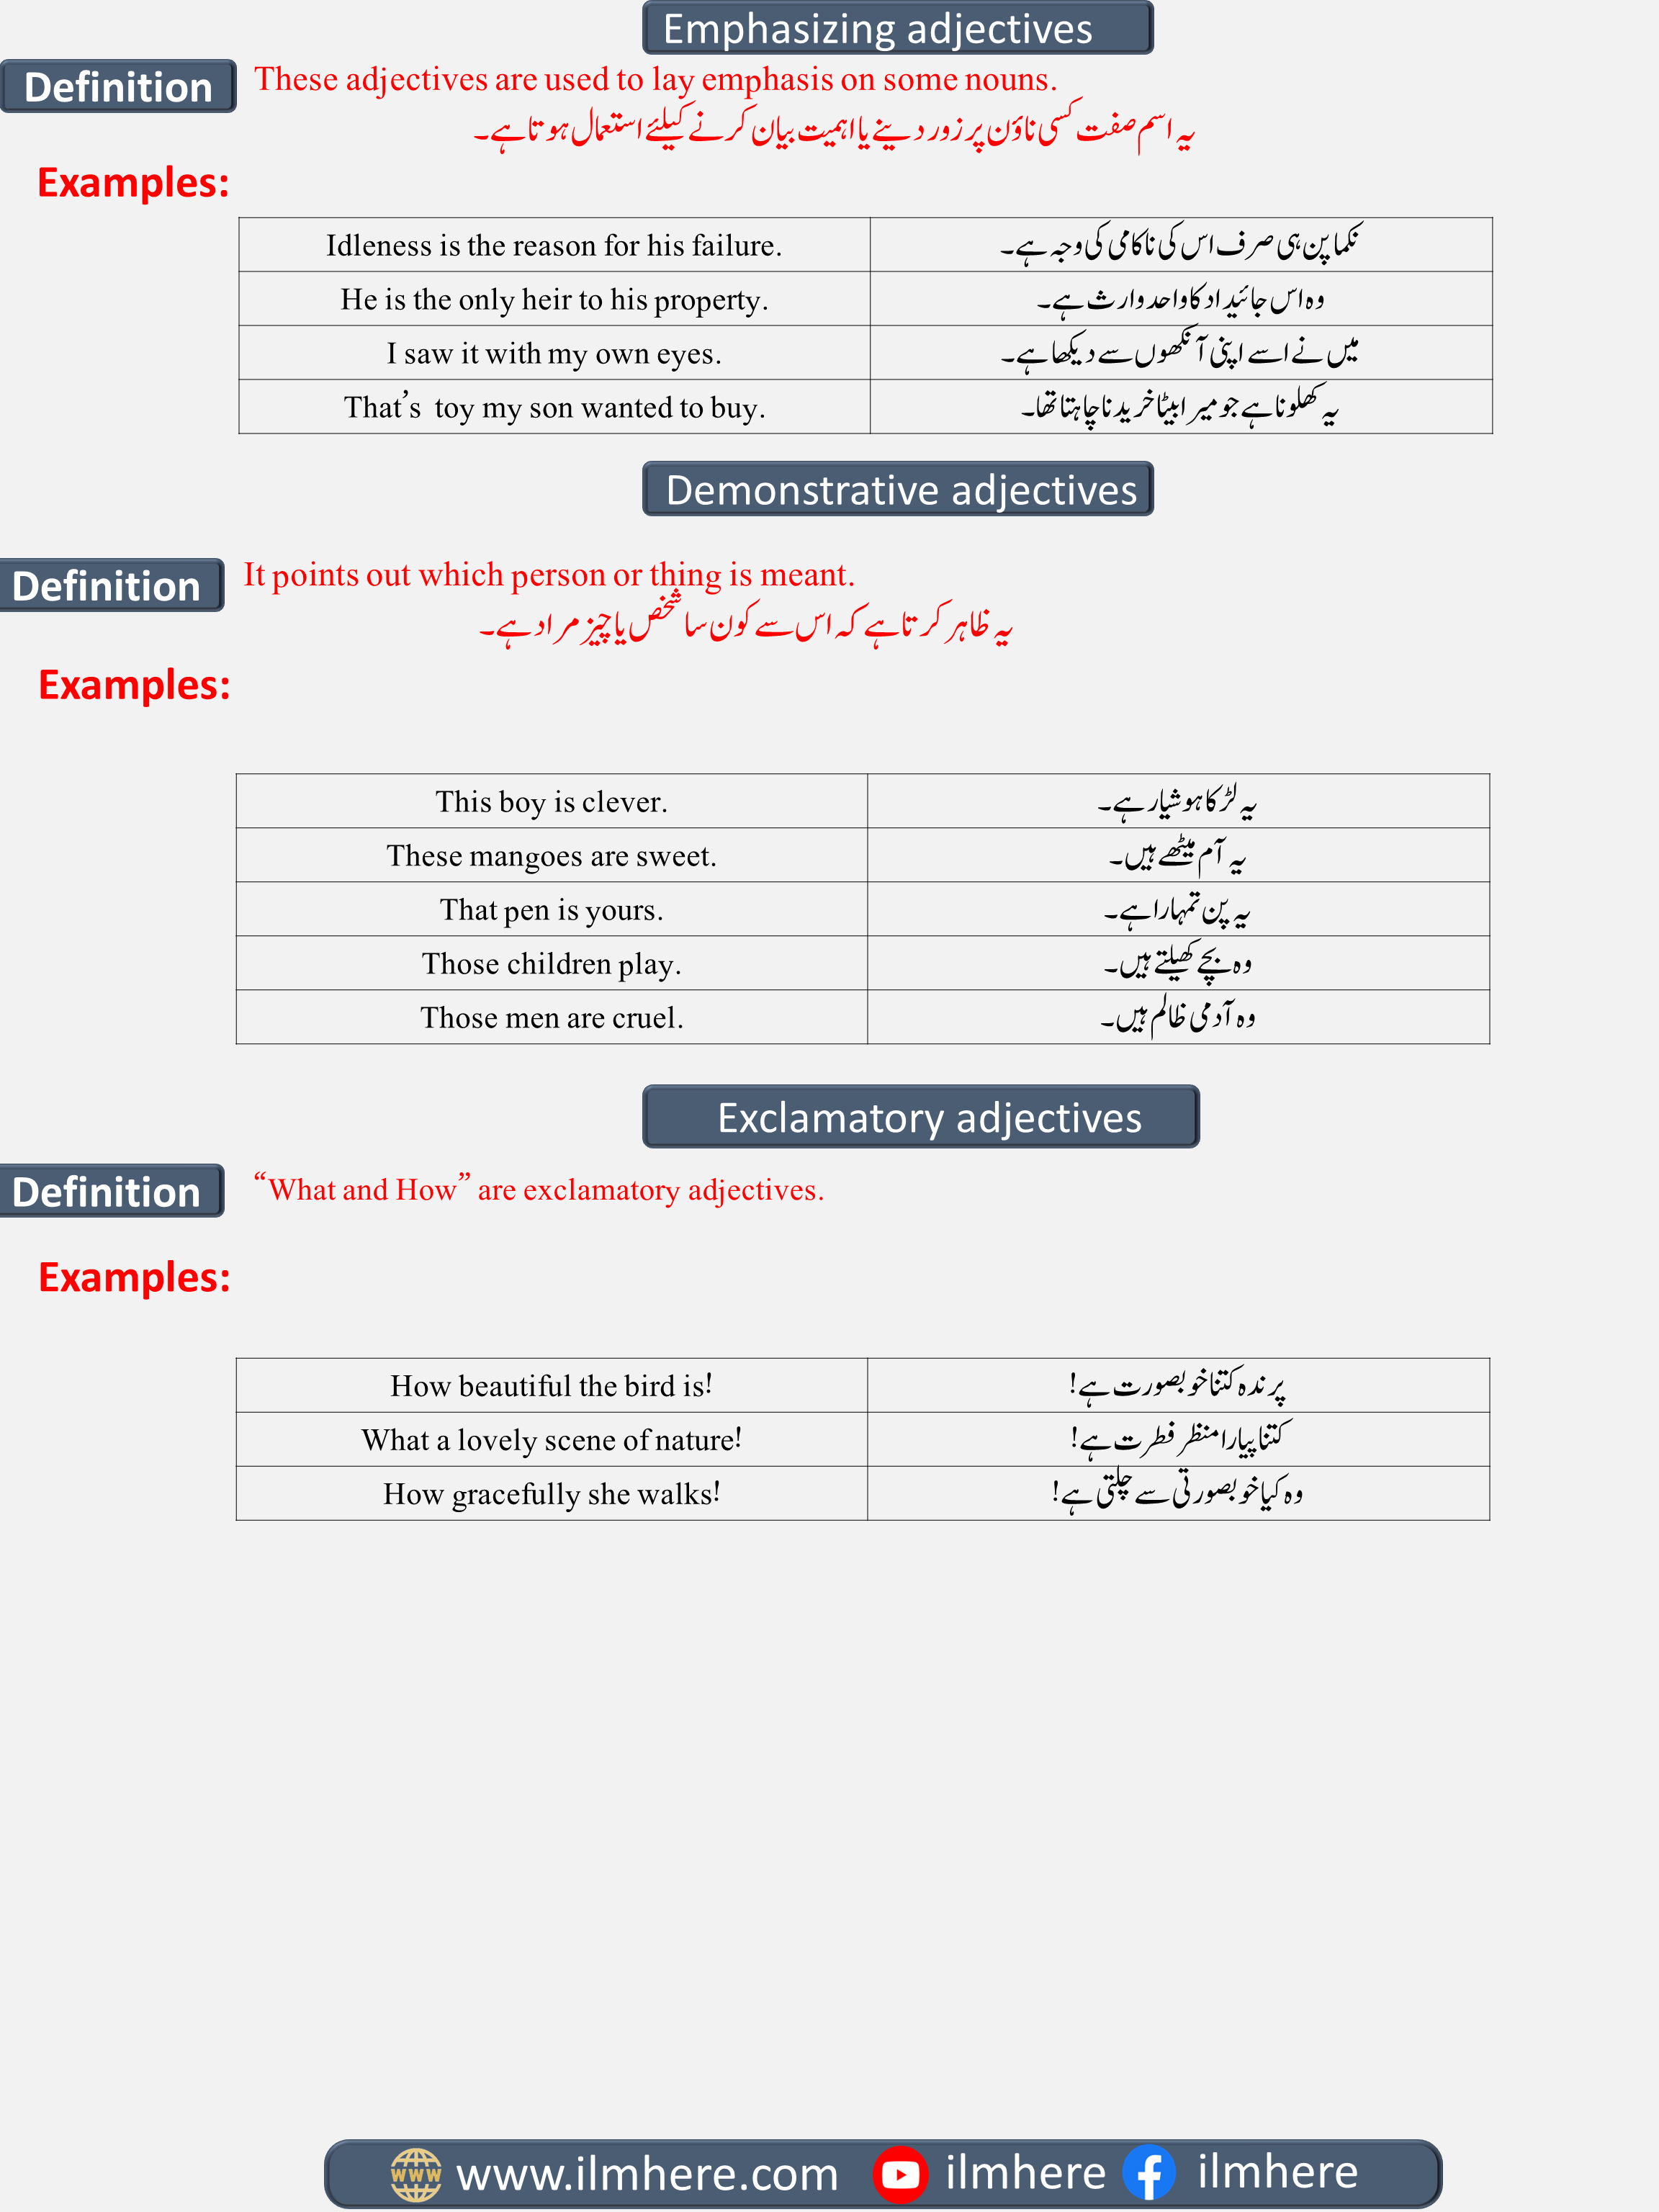 What Are Adjectives And Types Of Adjectives | PDF Download